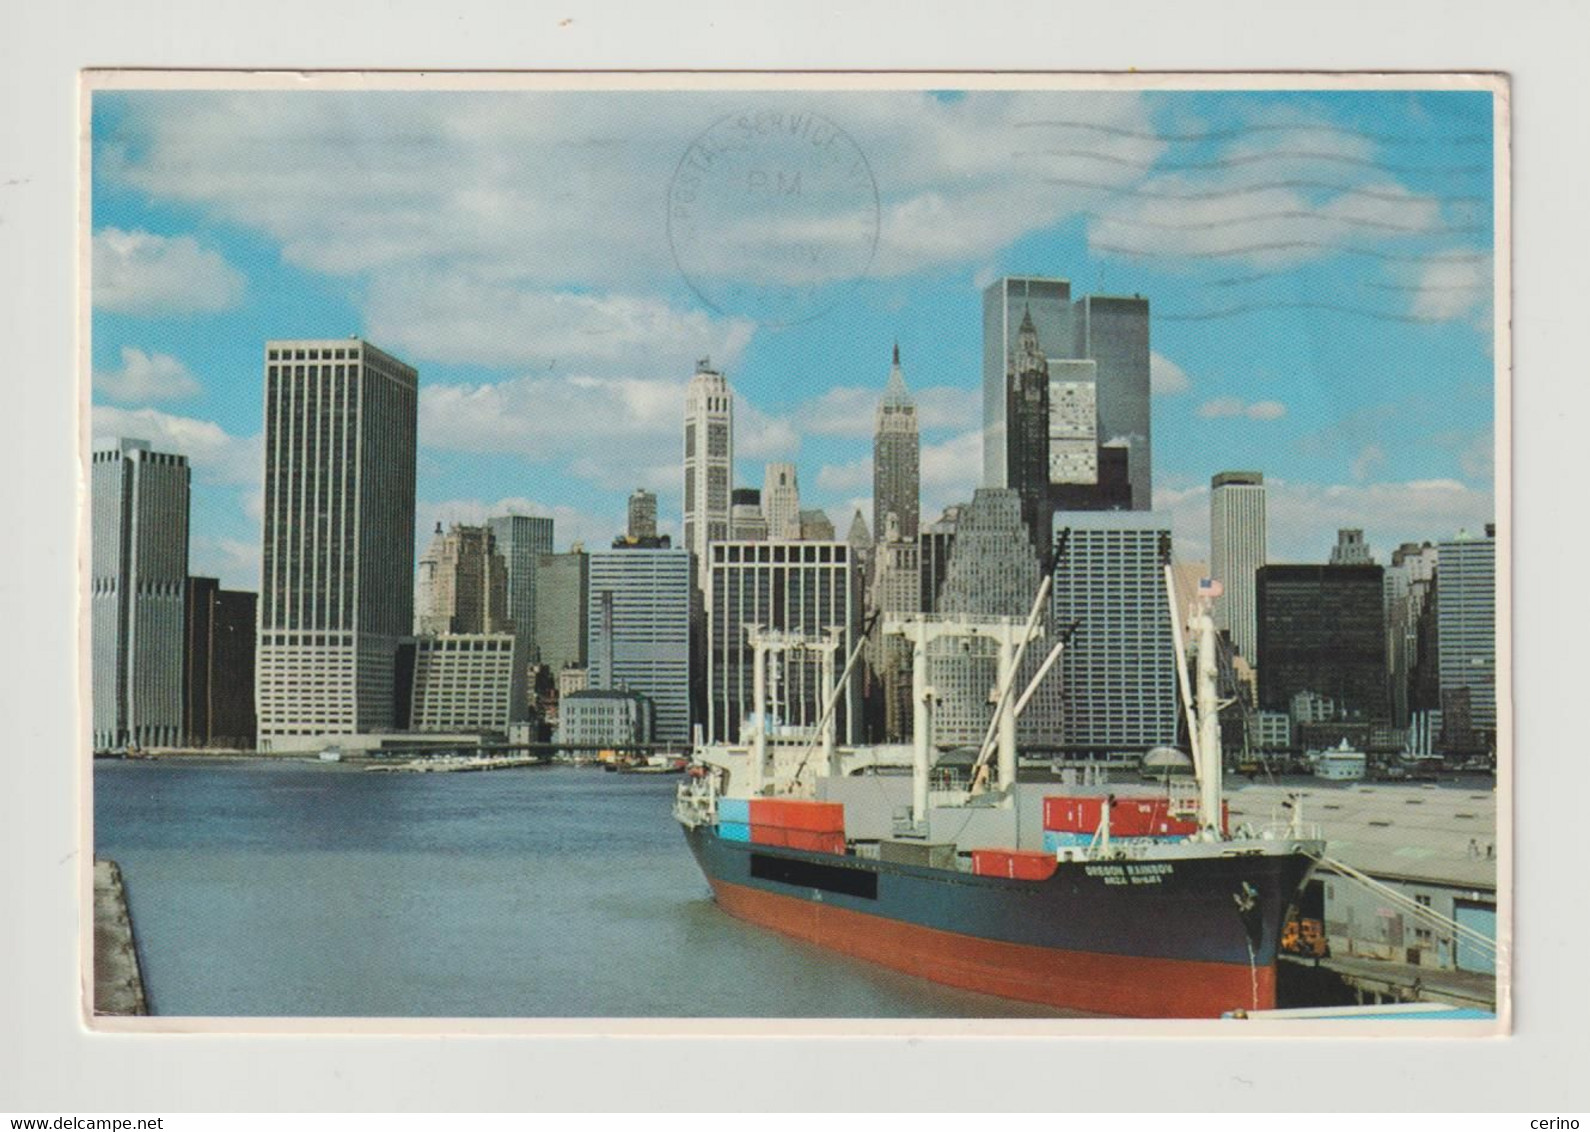 NEW  YORK  CITY:  OCEAN  FREIGHTER  DOCKED  AT  A  BROOKLYN  PIER ...-  STAMP  REMOVED  -  TO  ITALY  -  FG - Bridges & Tunnels